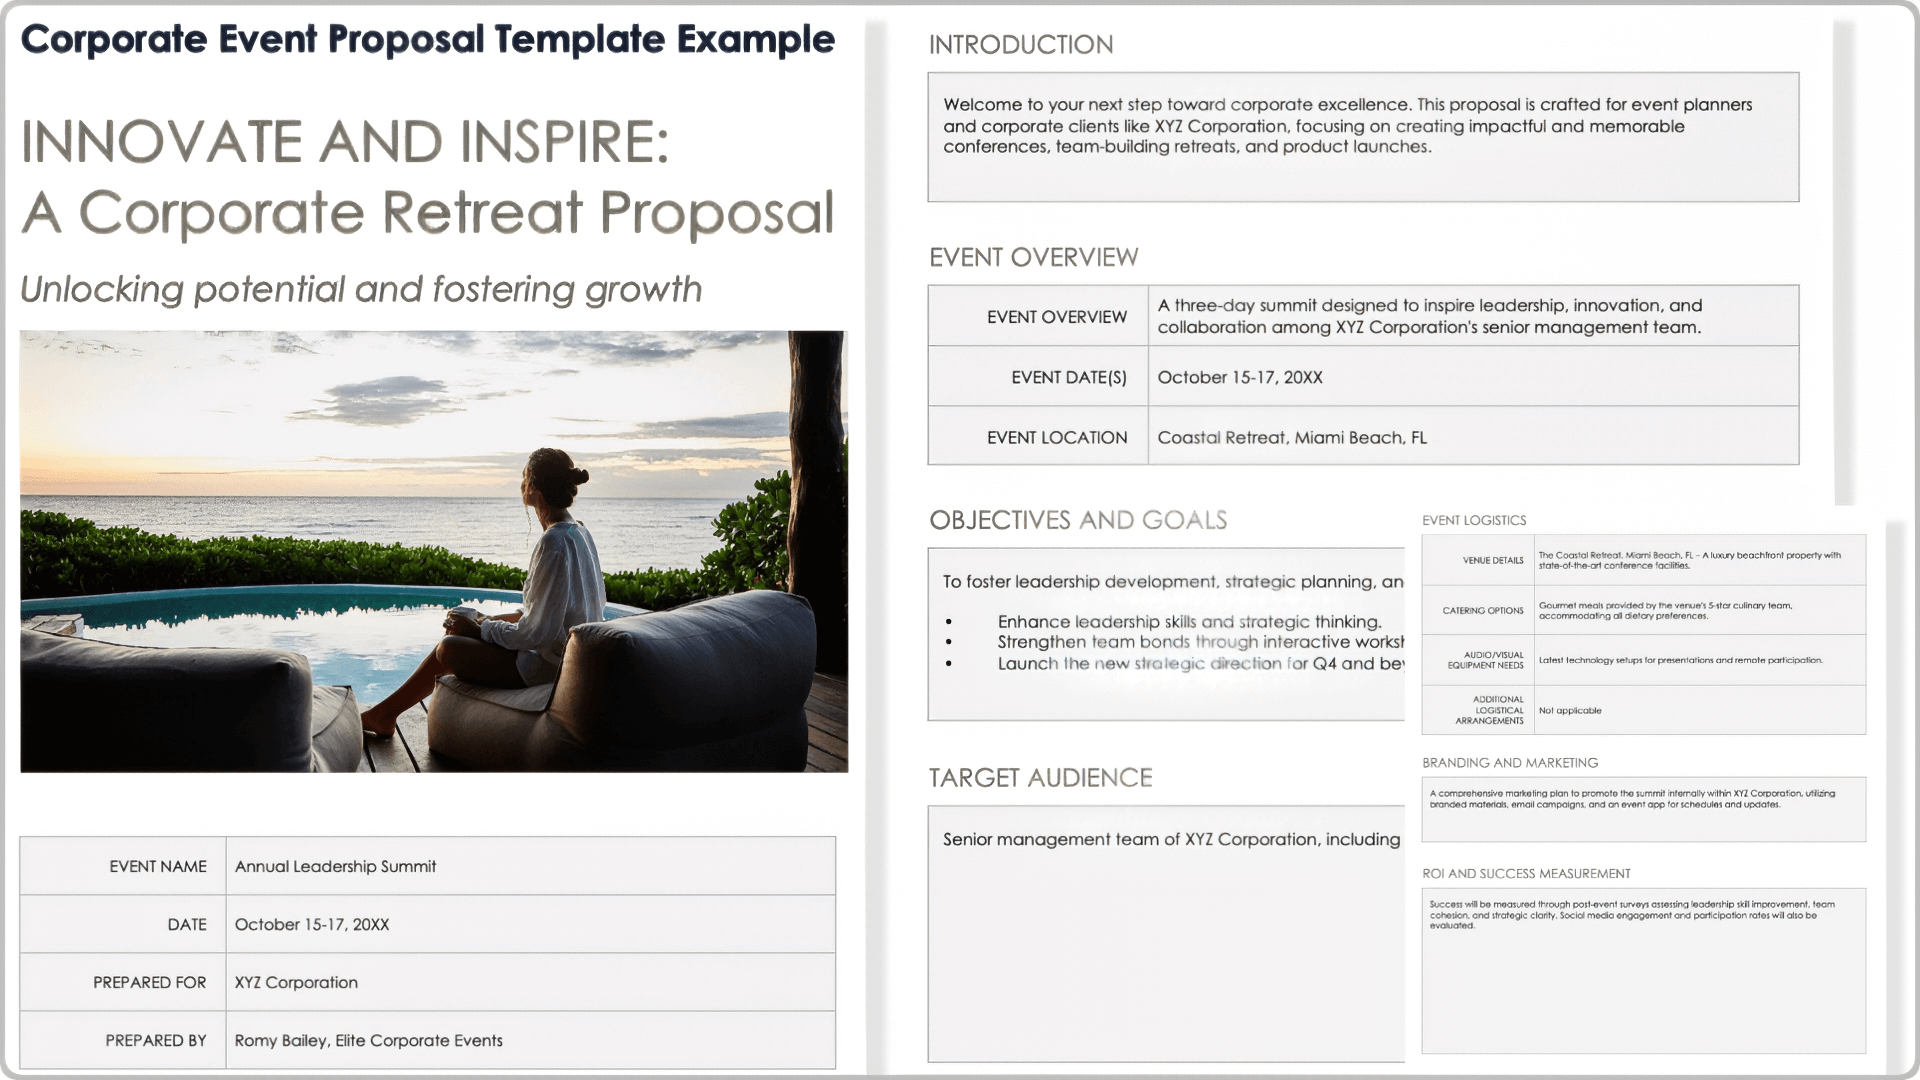 Corporate Event Proposal Template Example